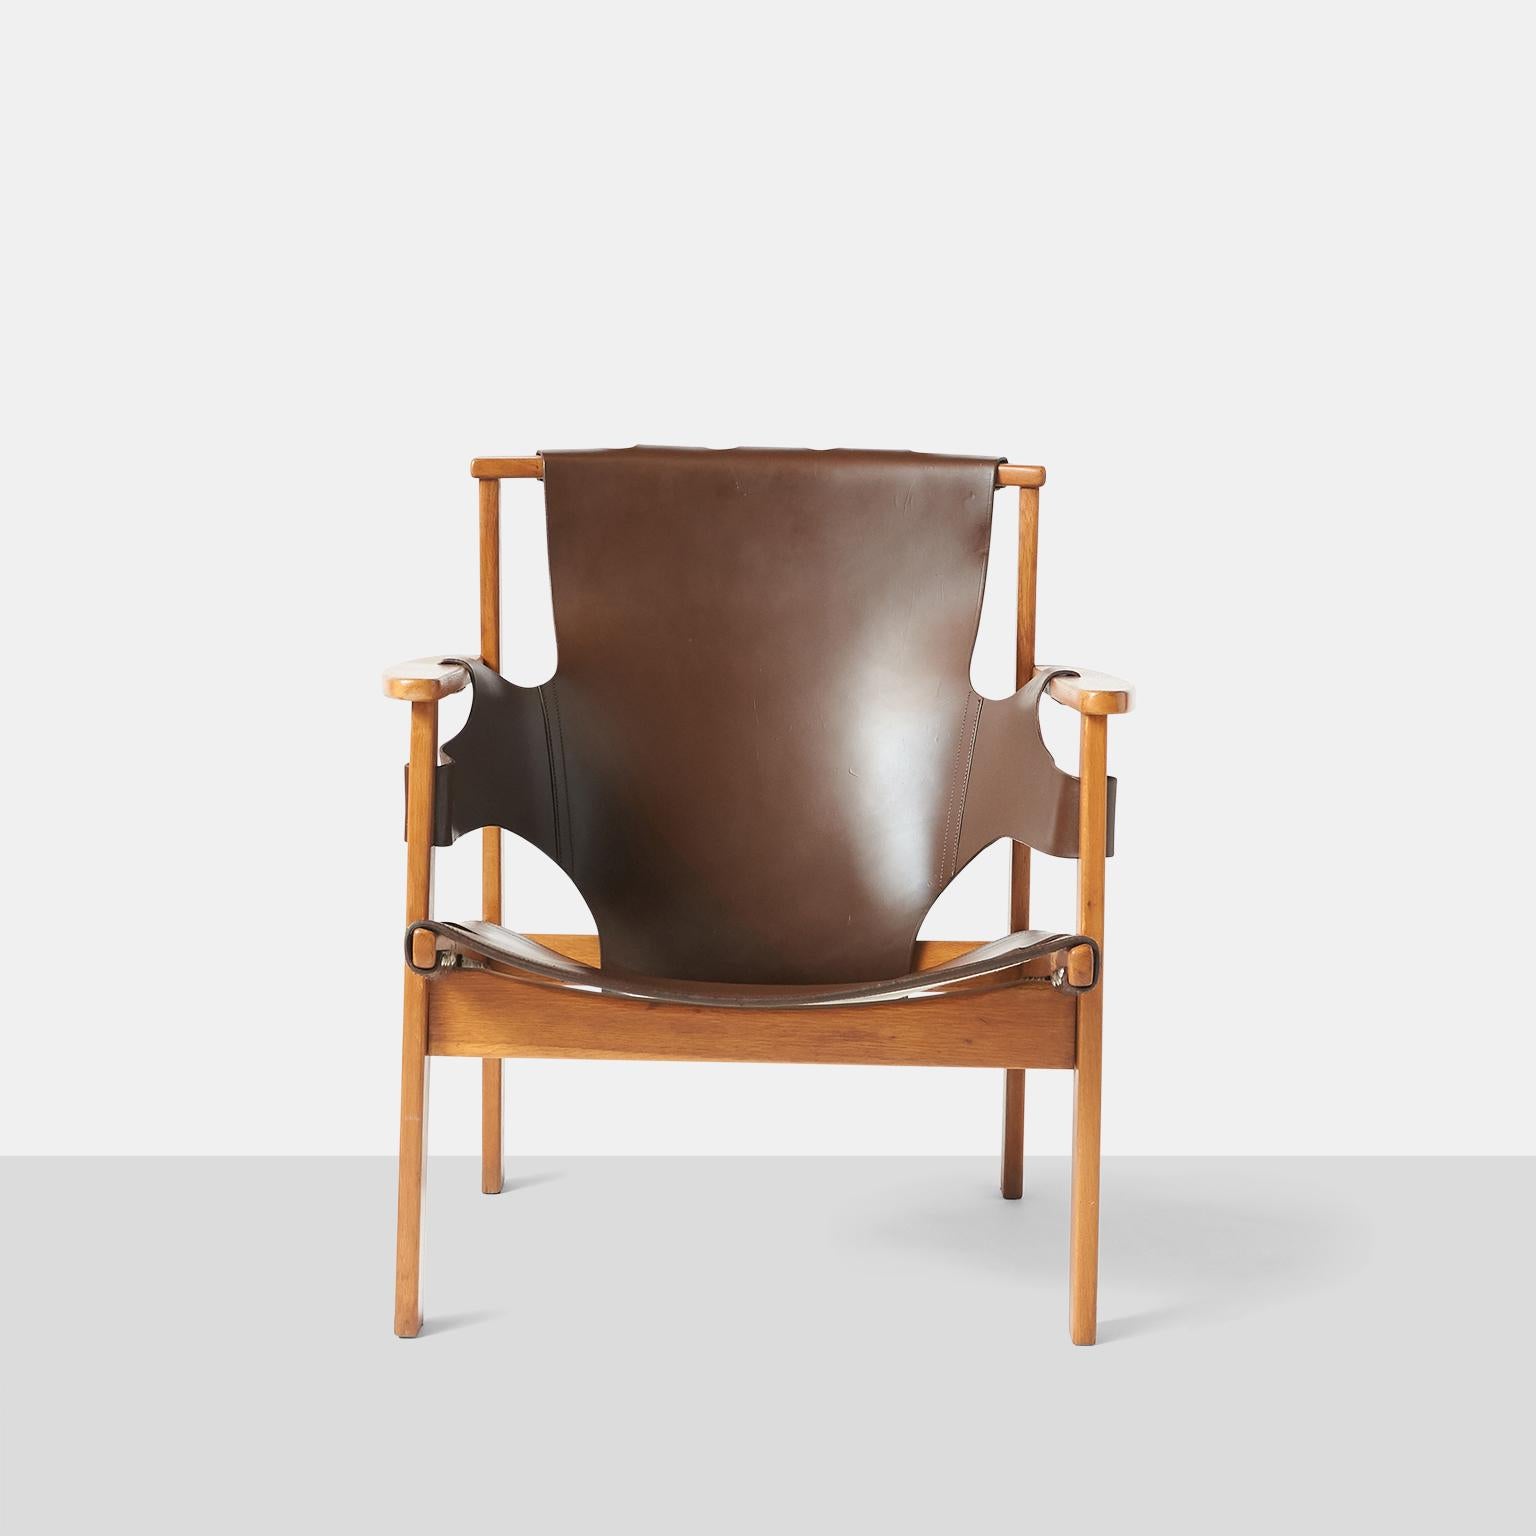 Swedish Pair of “Trienna” Armchairs by Carl-Axel Acking